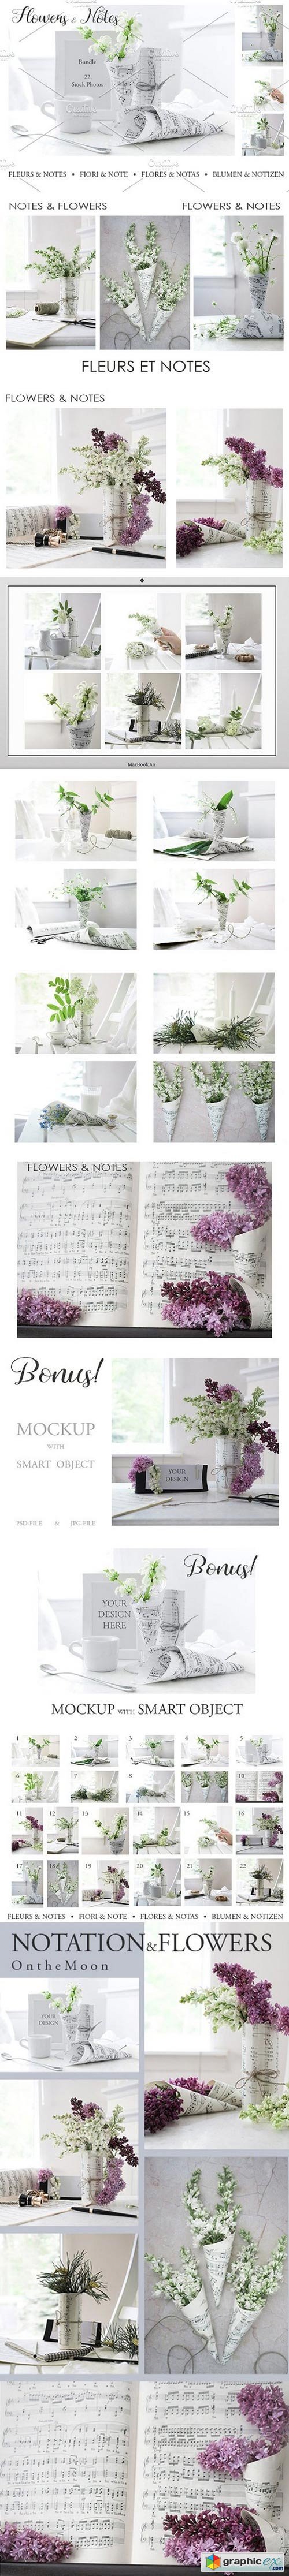 NOTATION. FLOWERS & NOTES